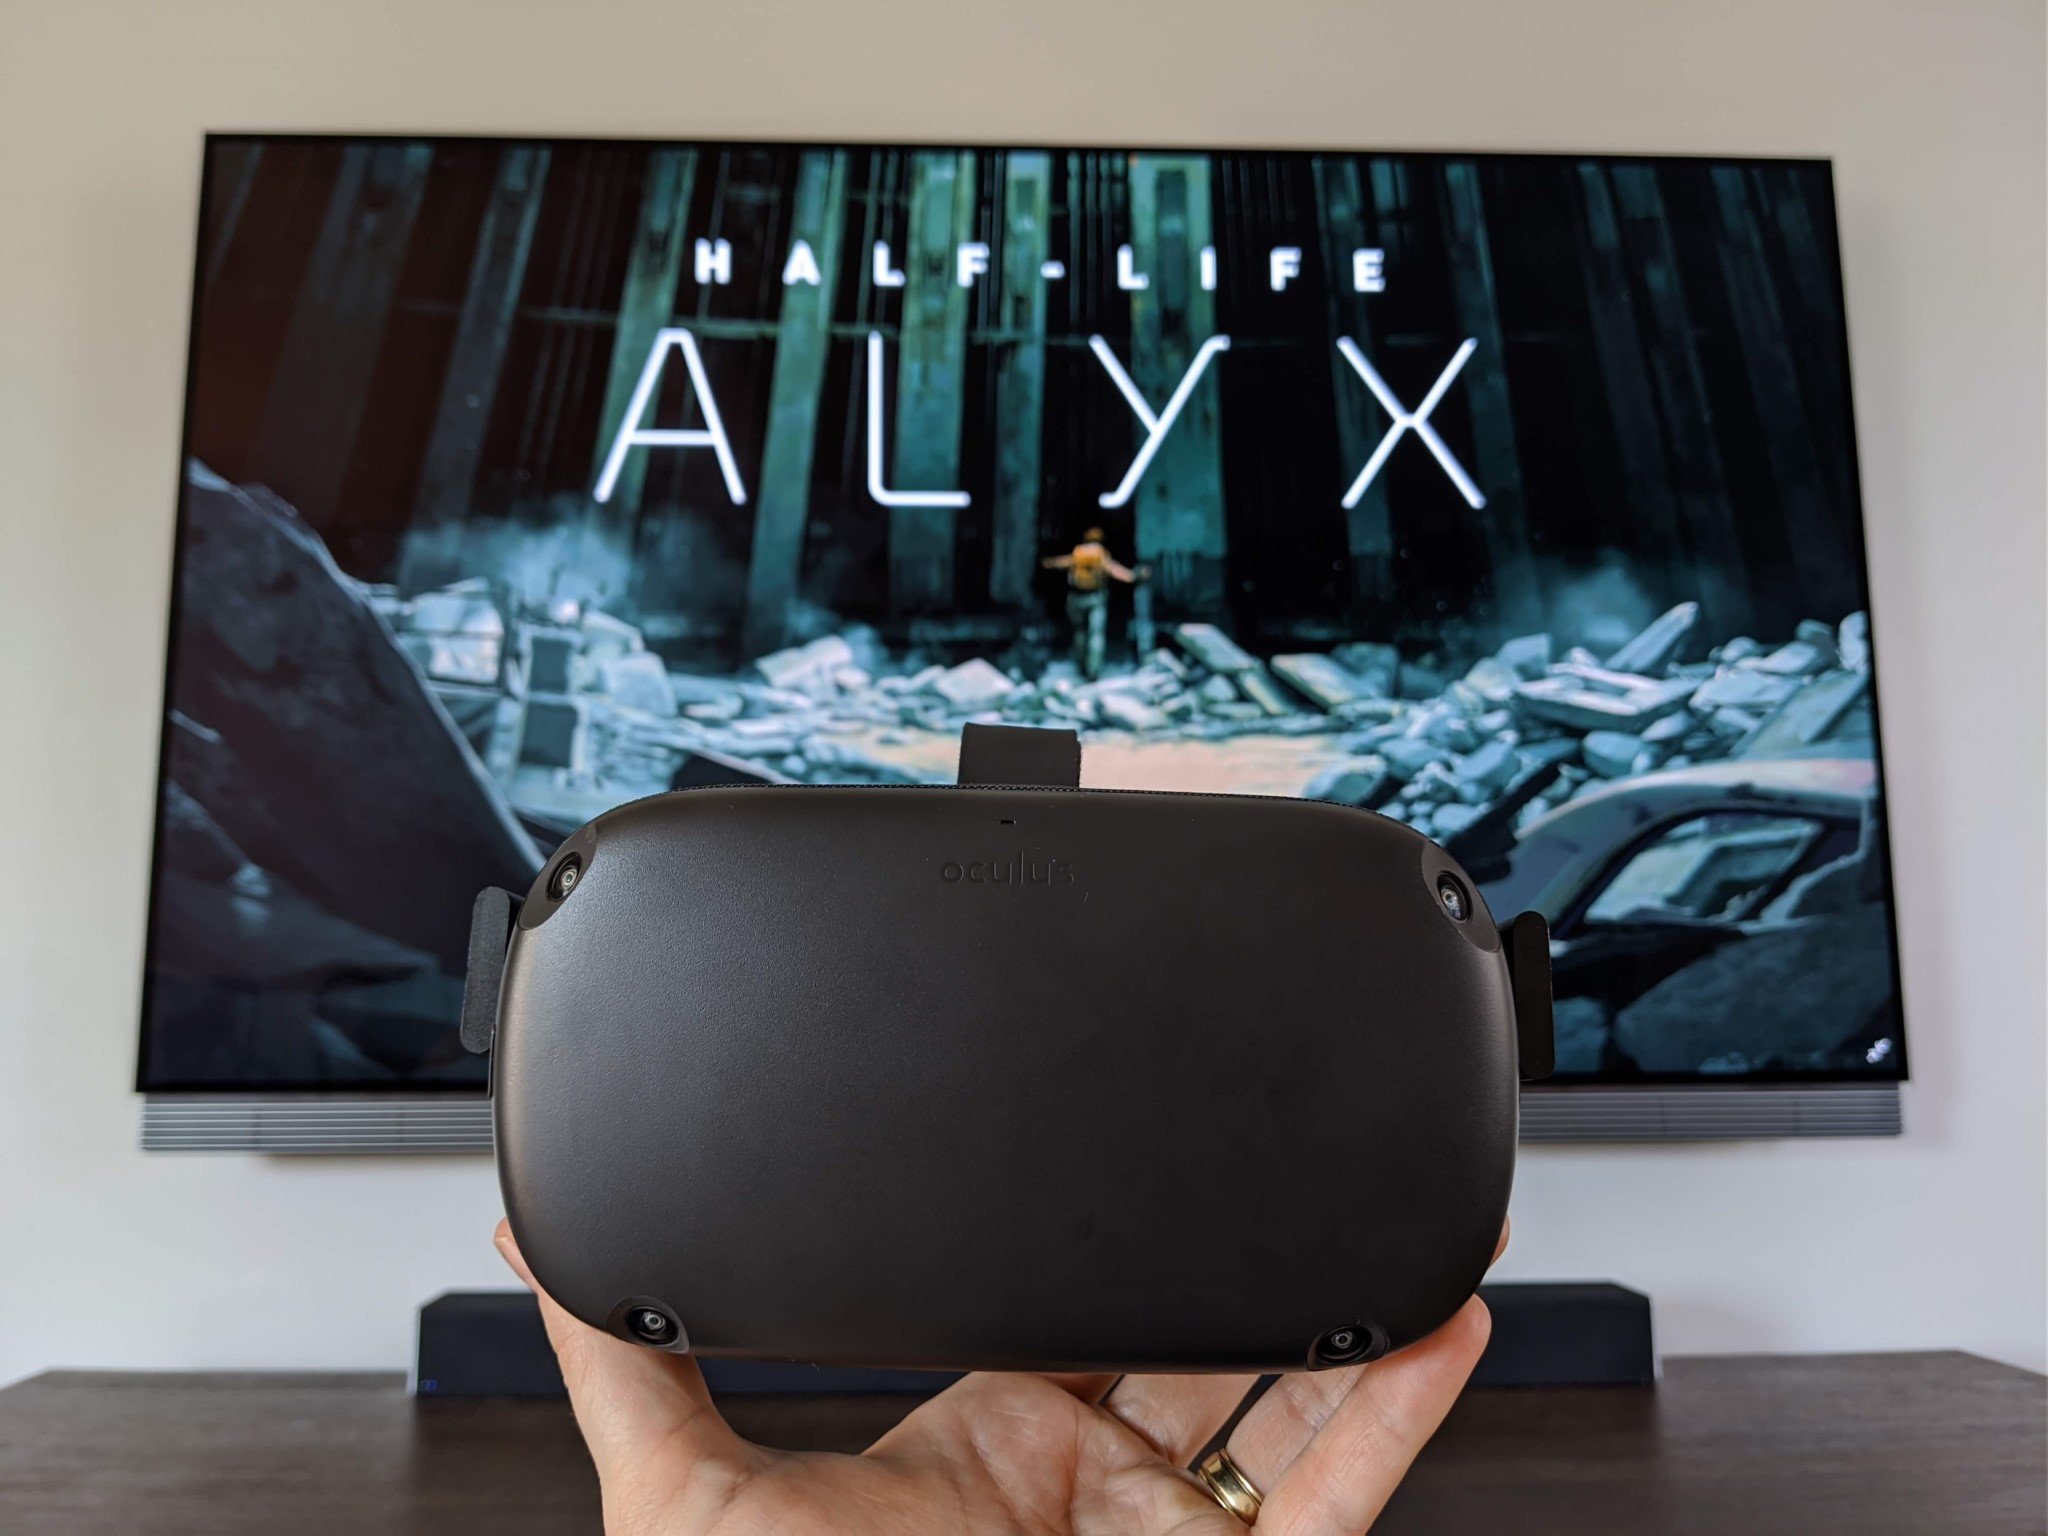 How To Download And Install Half-Life Alyx On Oculus Quest – Novint